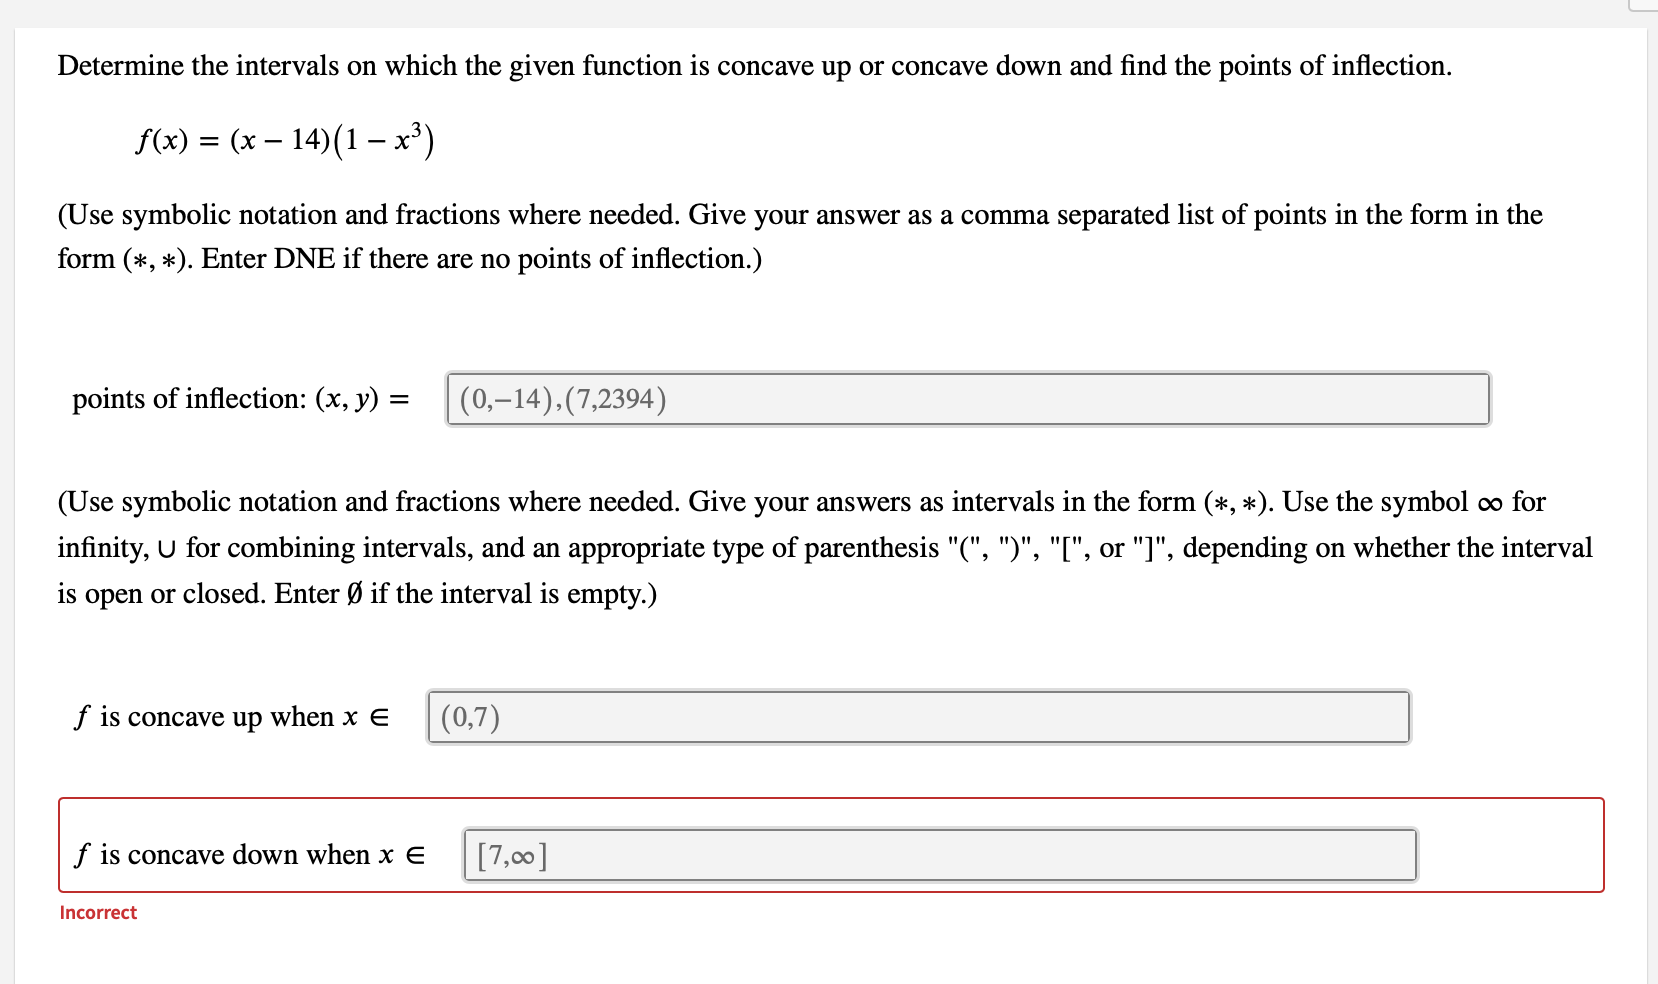 Determine the intervals on which the given function is concave up or concave down and find the points of inflection.
f(x) = (x – 14)(1 – x³)
(Use symbolic notation and fractions where needed. Give your answer as a comma separated list of points in the form in the
form (*, *). Enter DNE if there are no points of inflection.)
points of inflection: (x, y) =
(0,–14),(7,2394)
(Use symbolic notation and fractions where needed. Give your answers as intervals in the form (*, *). Use the symbol o for
infinity, U for combining intervals, and an appropriate type of parenthesis "(", ")", "[", or "]", depending on whether the interval
is open or closed. Enter Ø if the interval is empty.)
